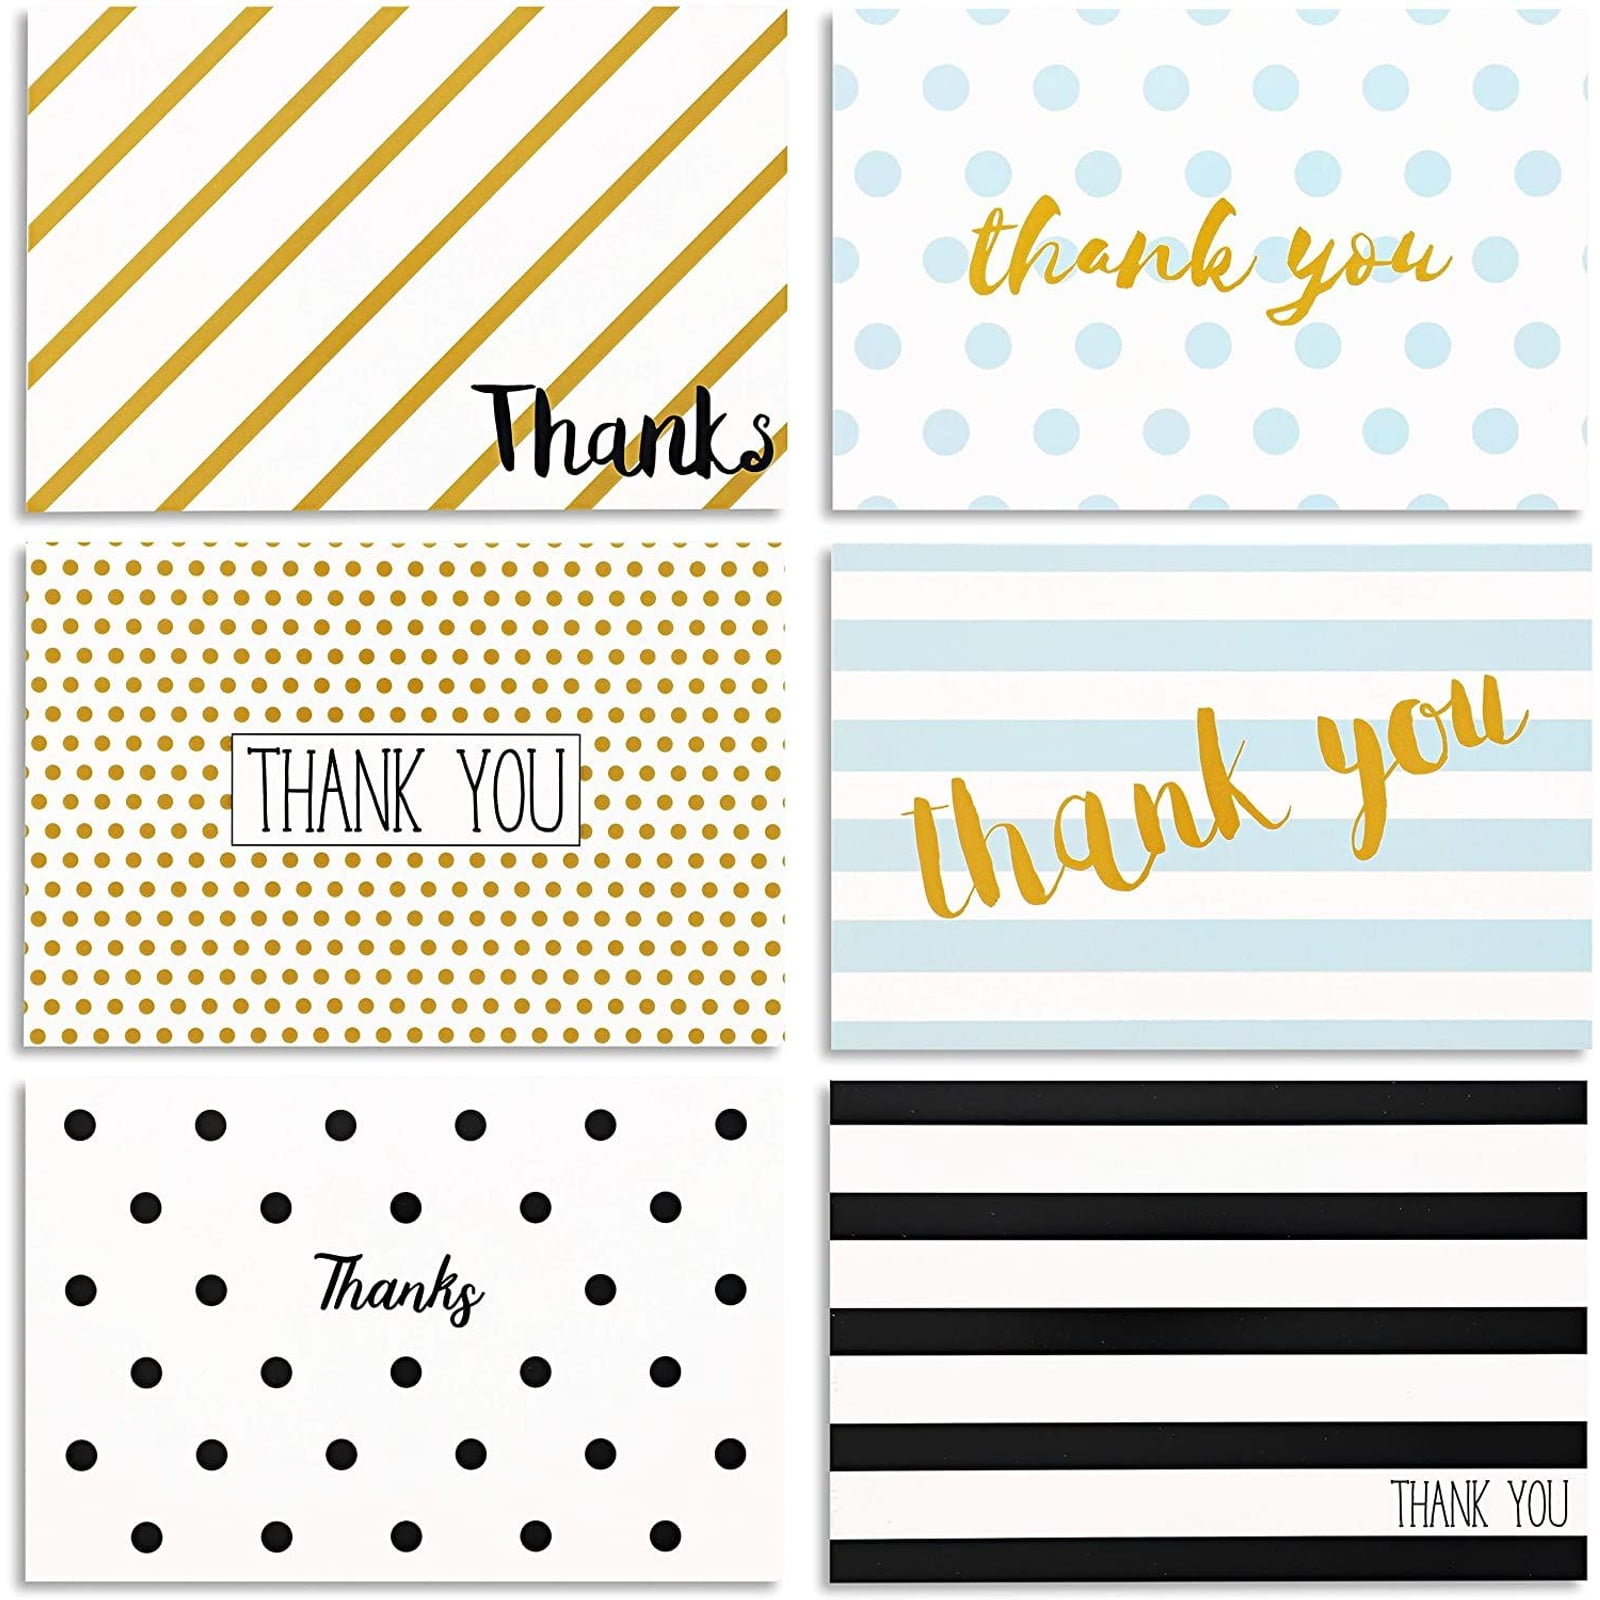 30 Thank You Cards Notes Pink Gold Princess Baby Shower Cards 30 White Envelopes 